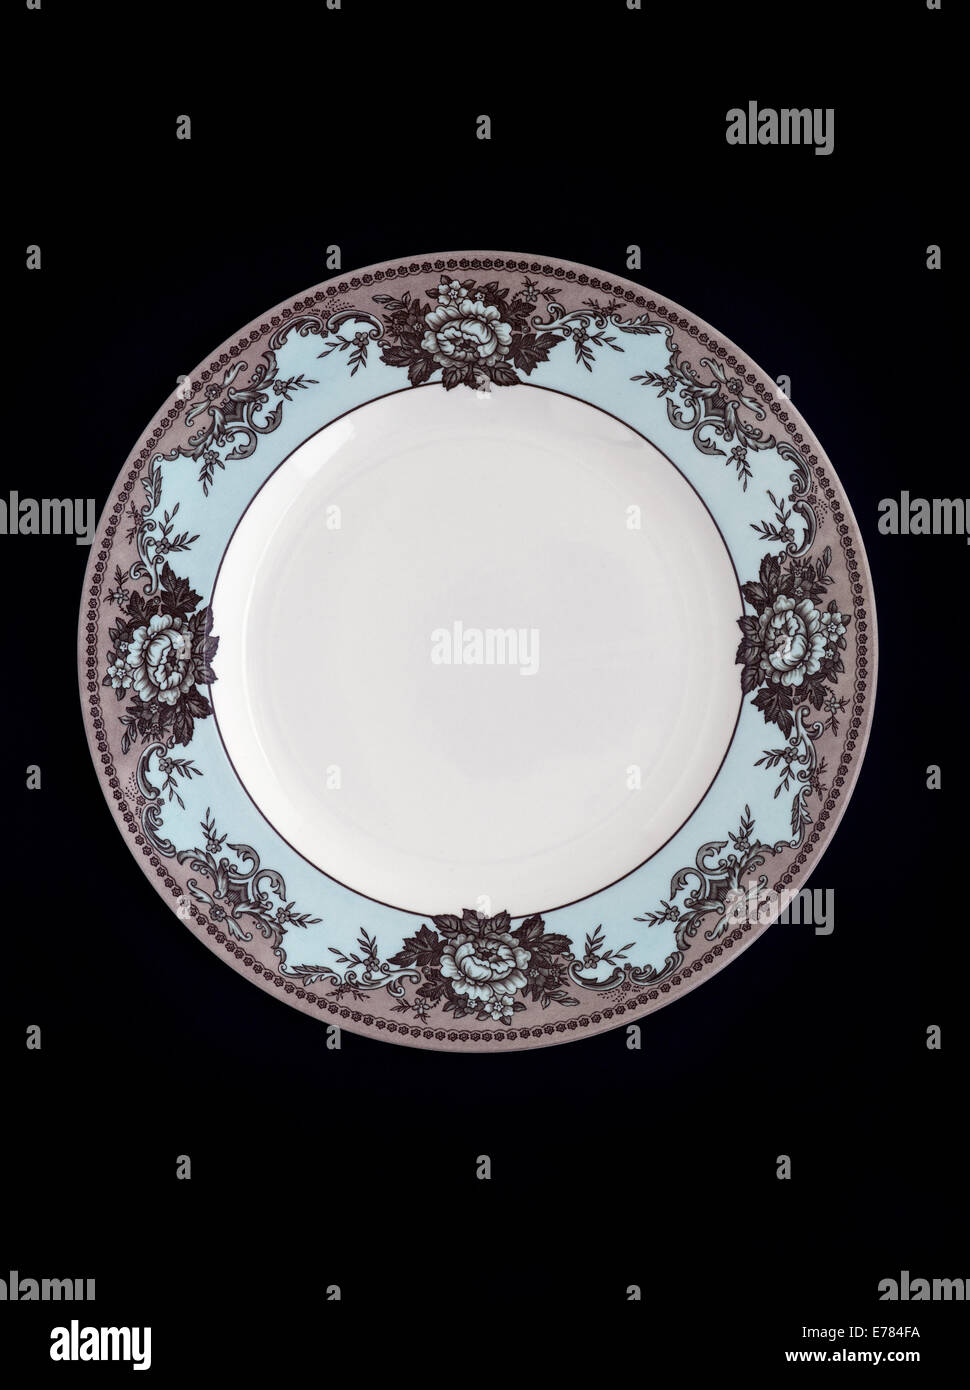 Vintage Dining Plate Stock Photo